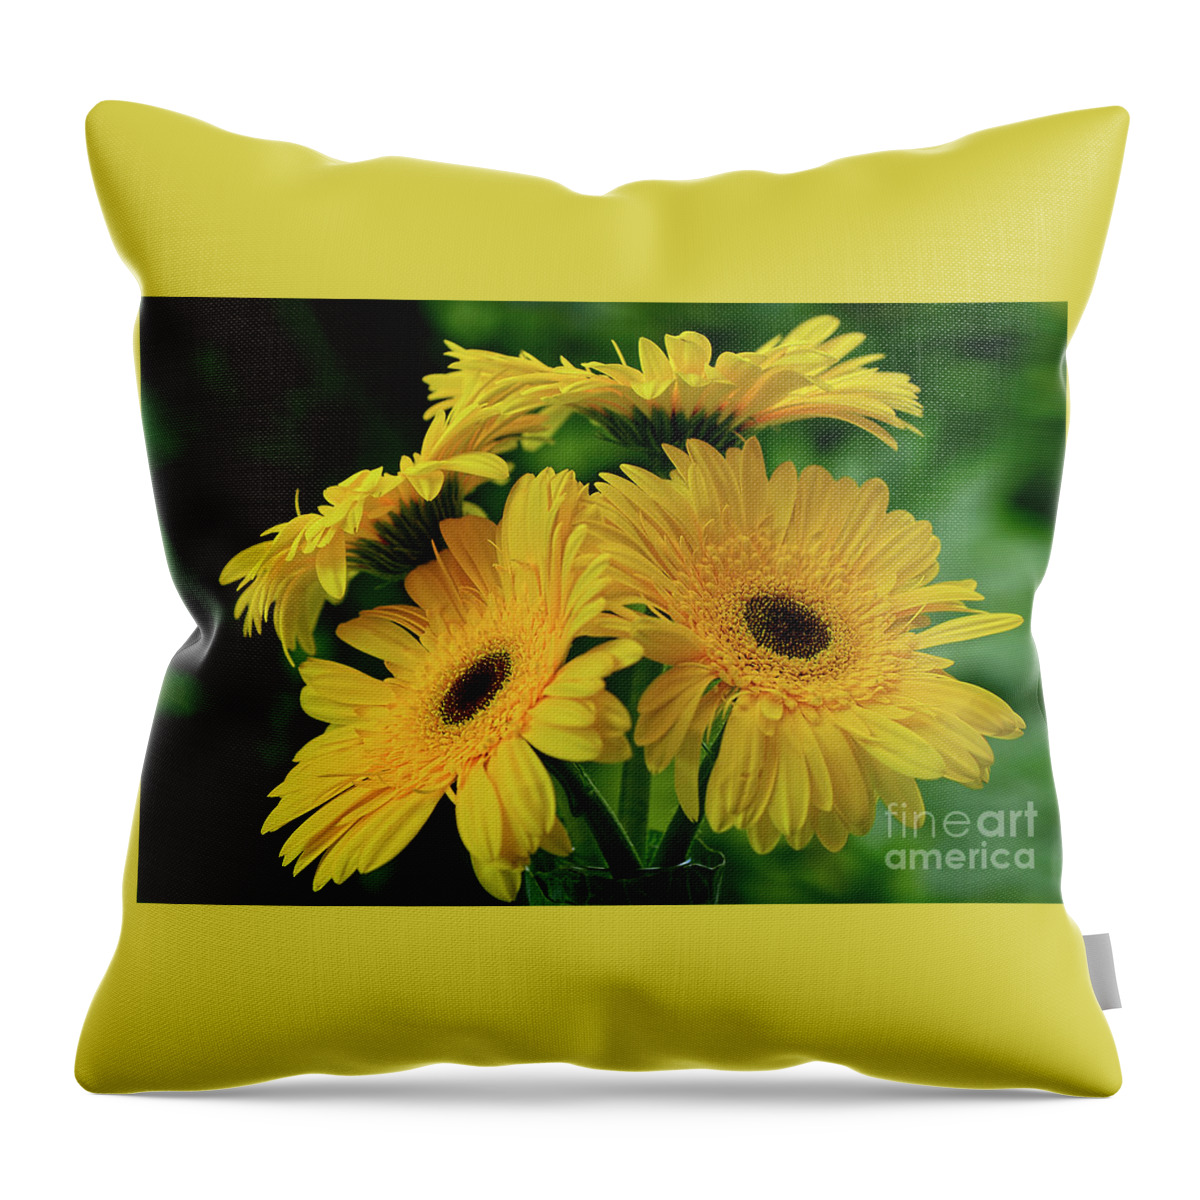 Yellow Gerbera Daisies Throw Pillow featuring the photograph Yellow Chrysanthemums by Kaye Menner by Kaye Menner